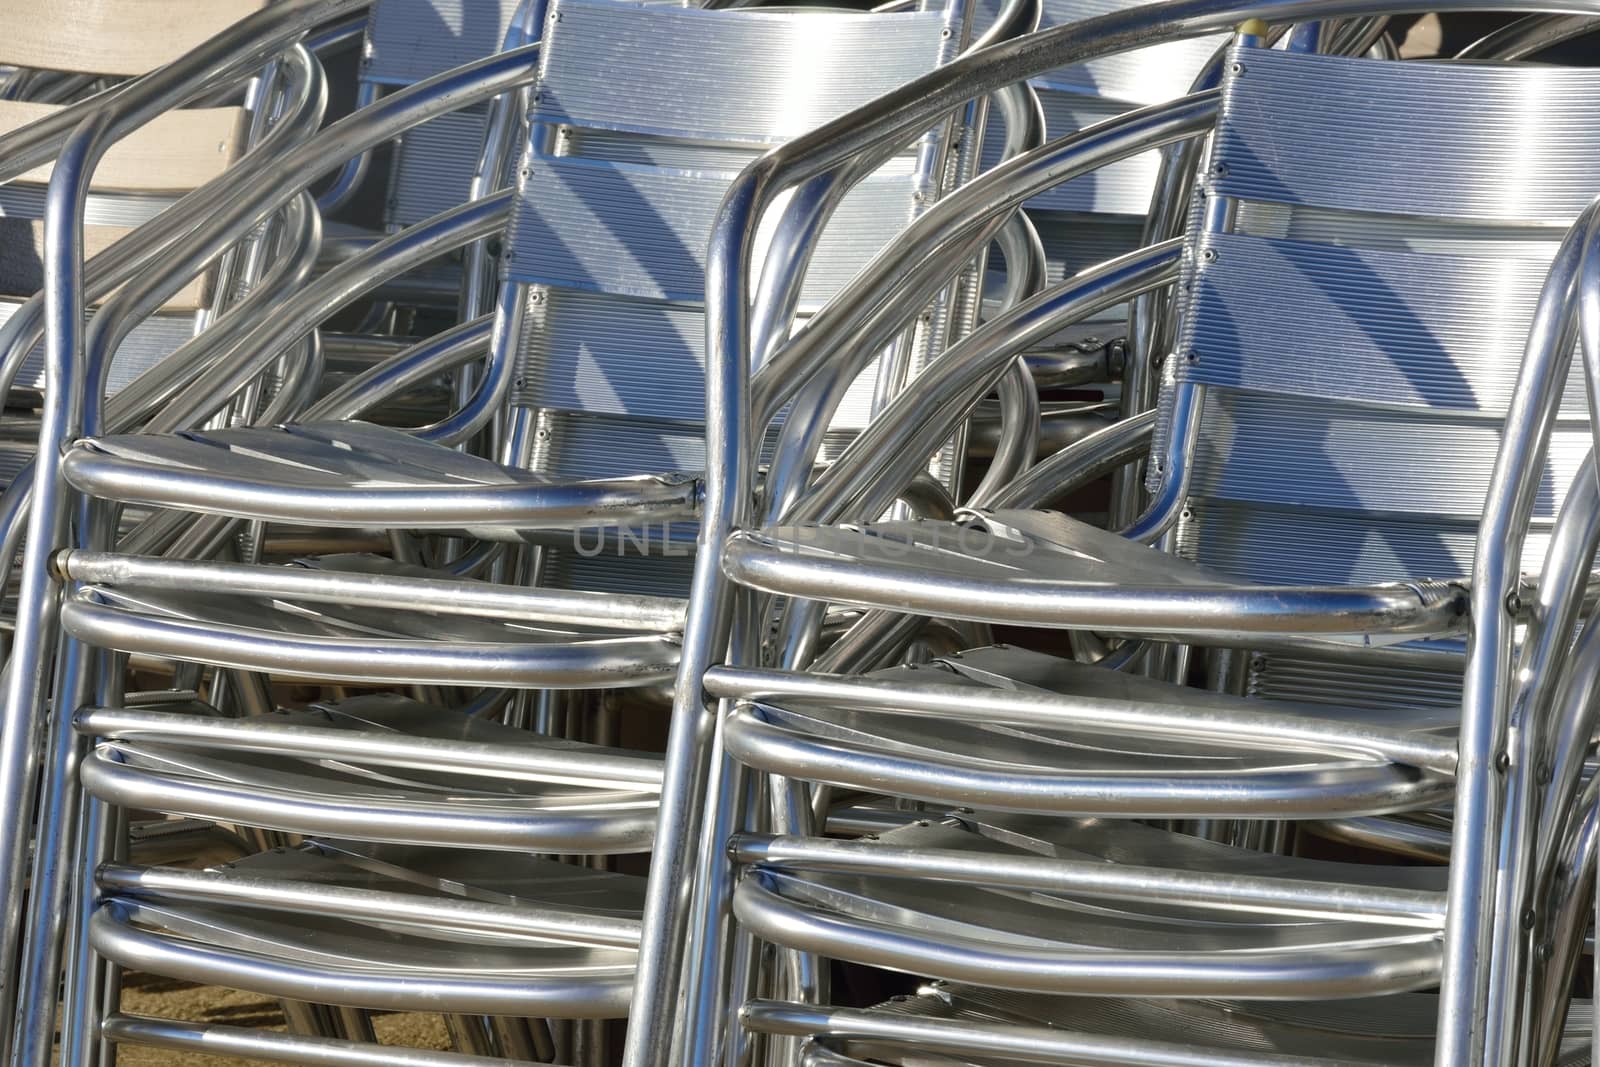 Aluminium chairs stacked up by pauws99